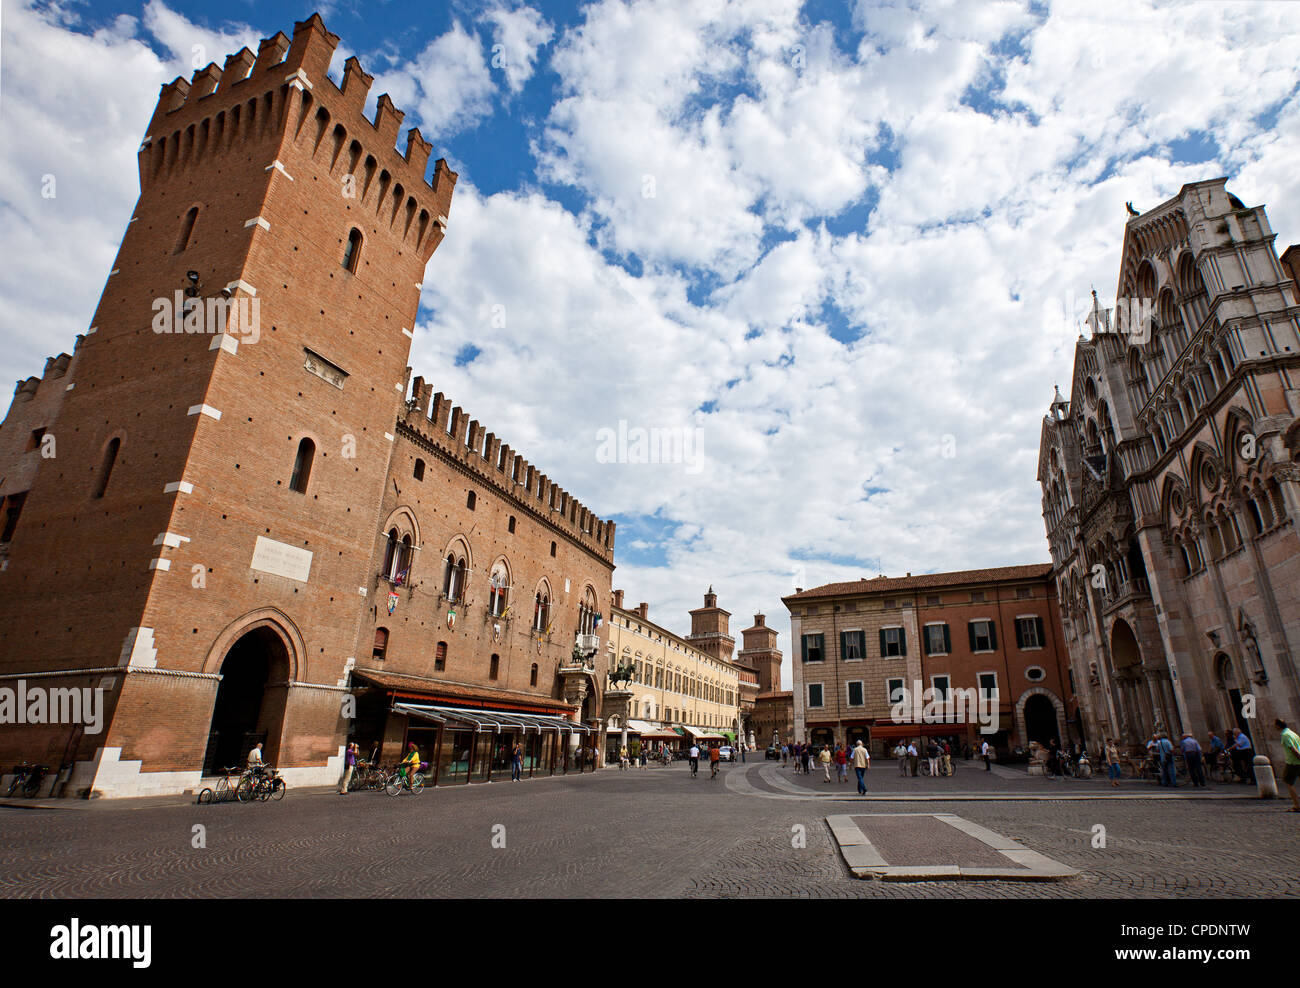 Italy, Ferrara, the Duomo square and the Ducale palace Stock Photo